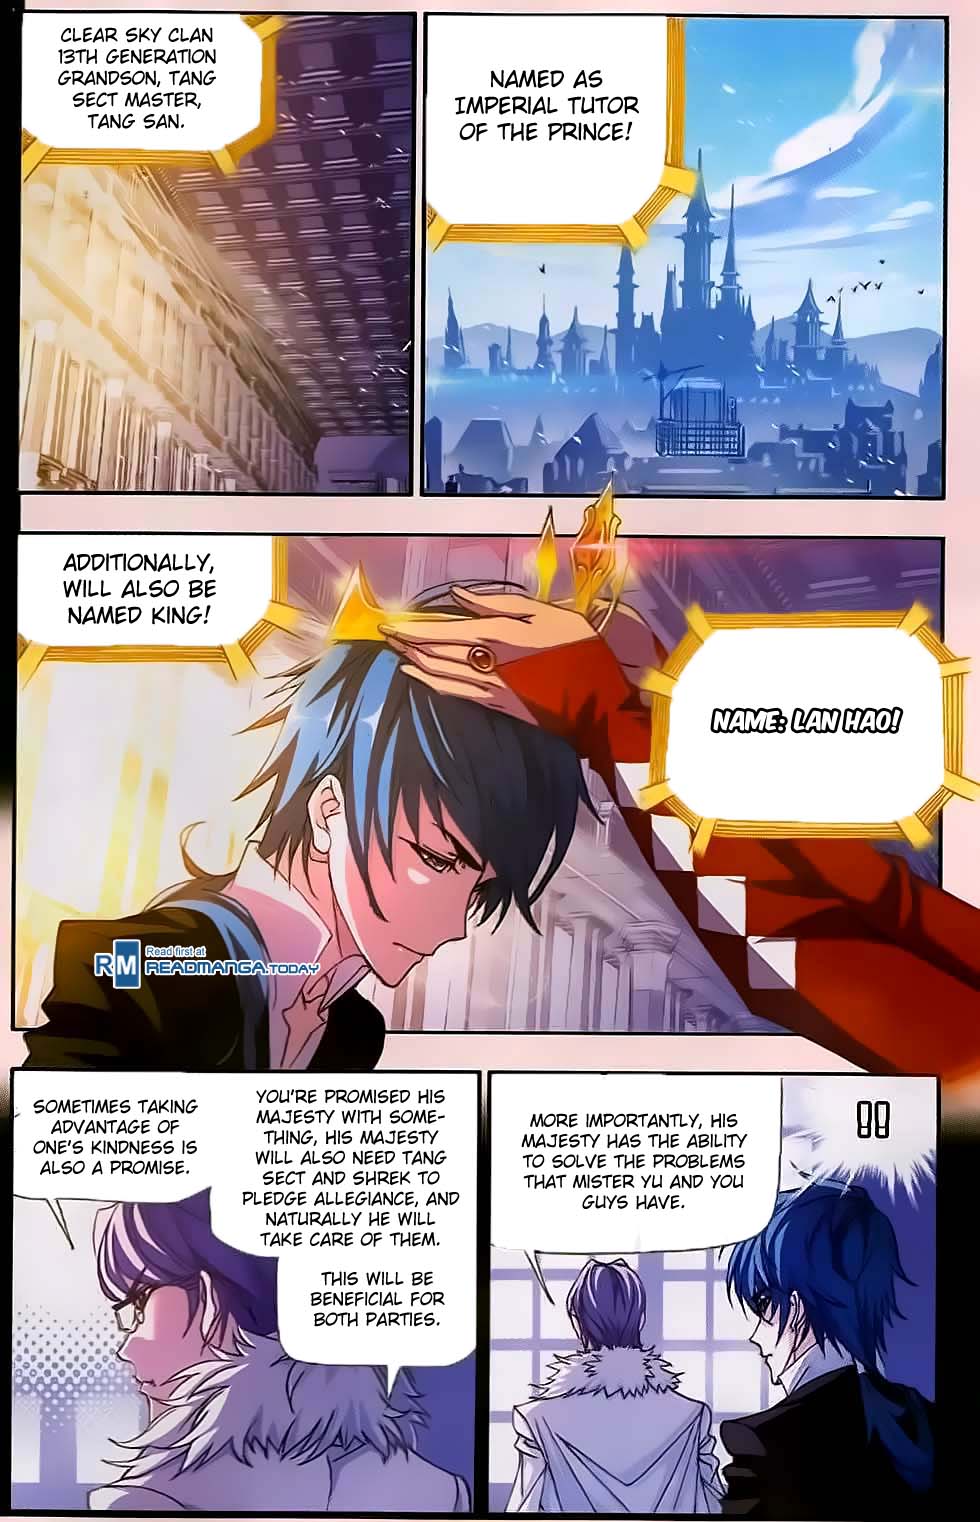 Soul Land Ch. 175 Crown Prince Imperial Tutor